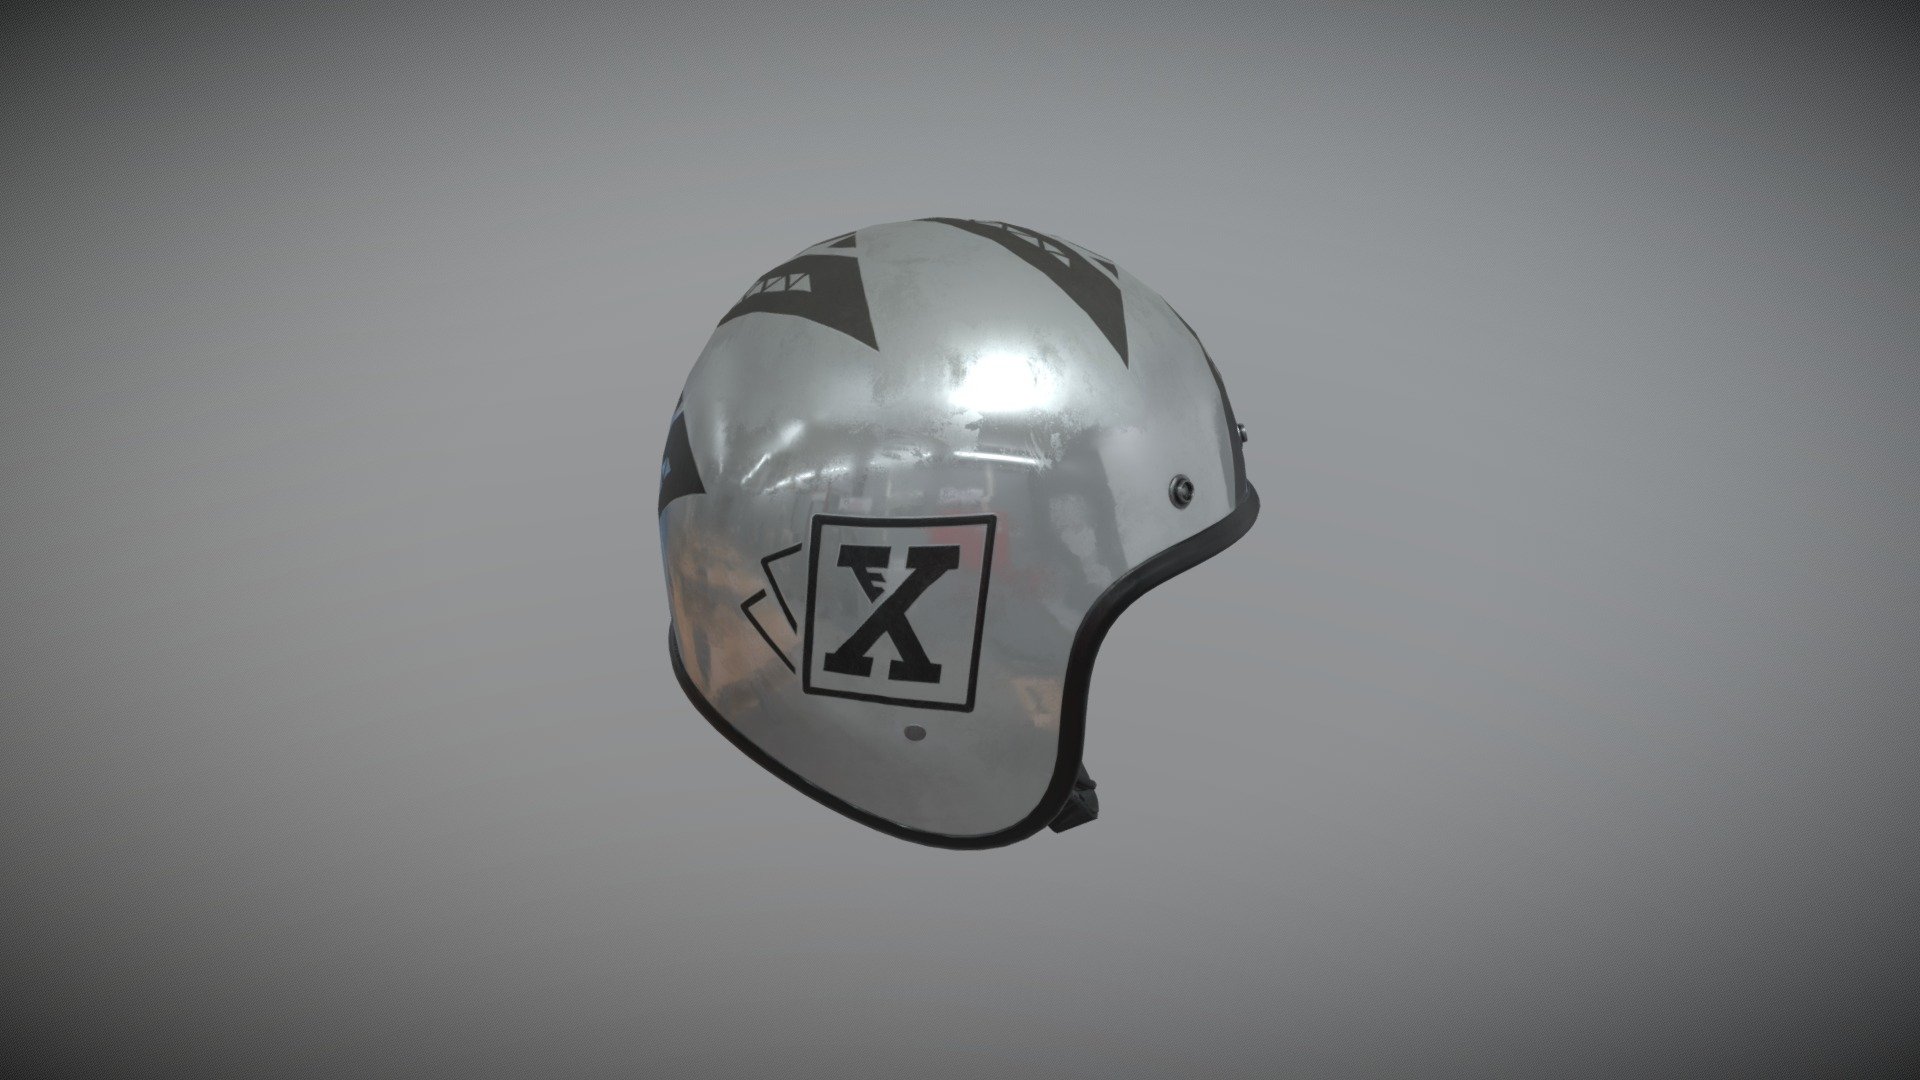 A motorcycle helmet asset made for games. Done in Maya, Substance Painter, Illustrator and Photoshop.

You can check all of them at: https://www.artstation.com/artwork/N5akZd
or
https://www.behance.net/gallery/75540961/Motorcycle-Helmets

Don't forget to leave a like or comment. Thanks! - Motorcycle Helmet 001 - 3D model by caduoliveira 3d model